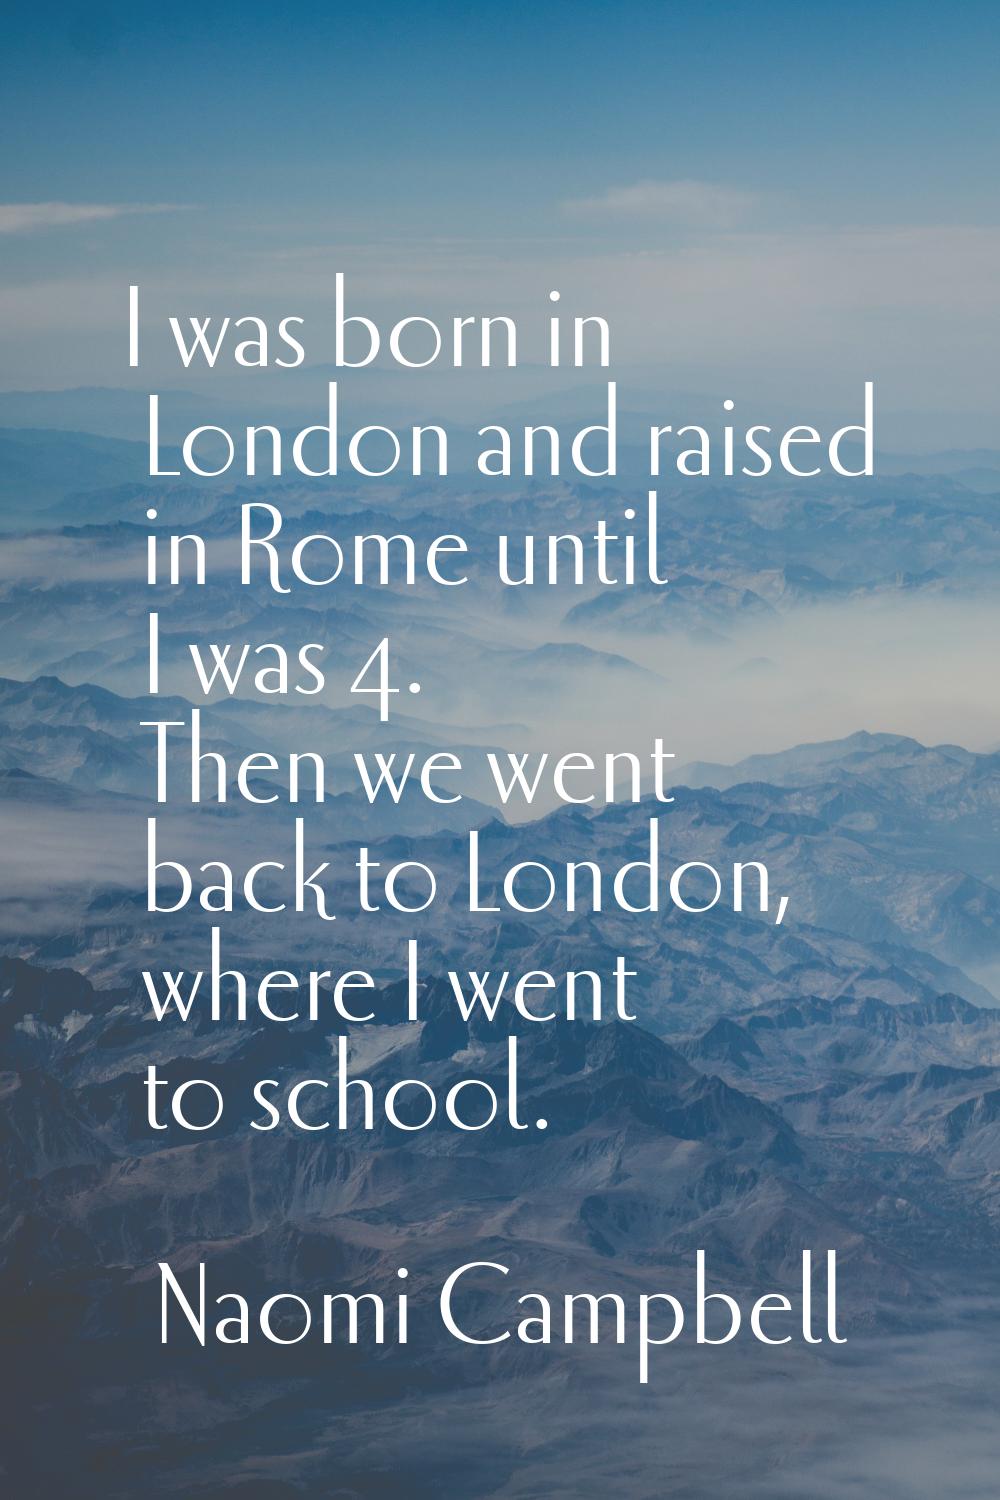 I was born in London and raised in Rome until I was 4. Then we went back to London, where I went to